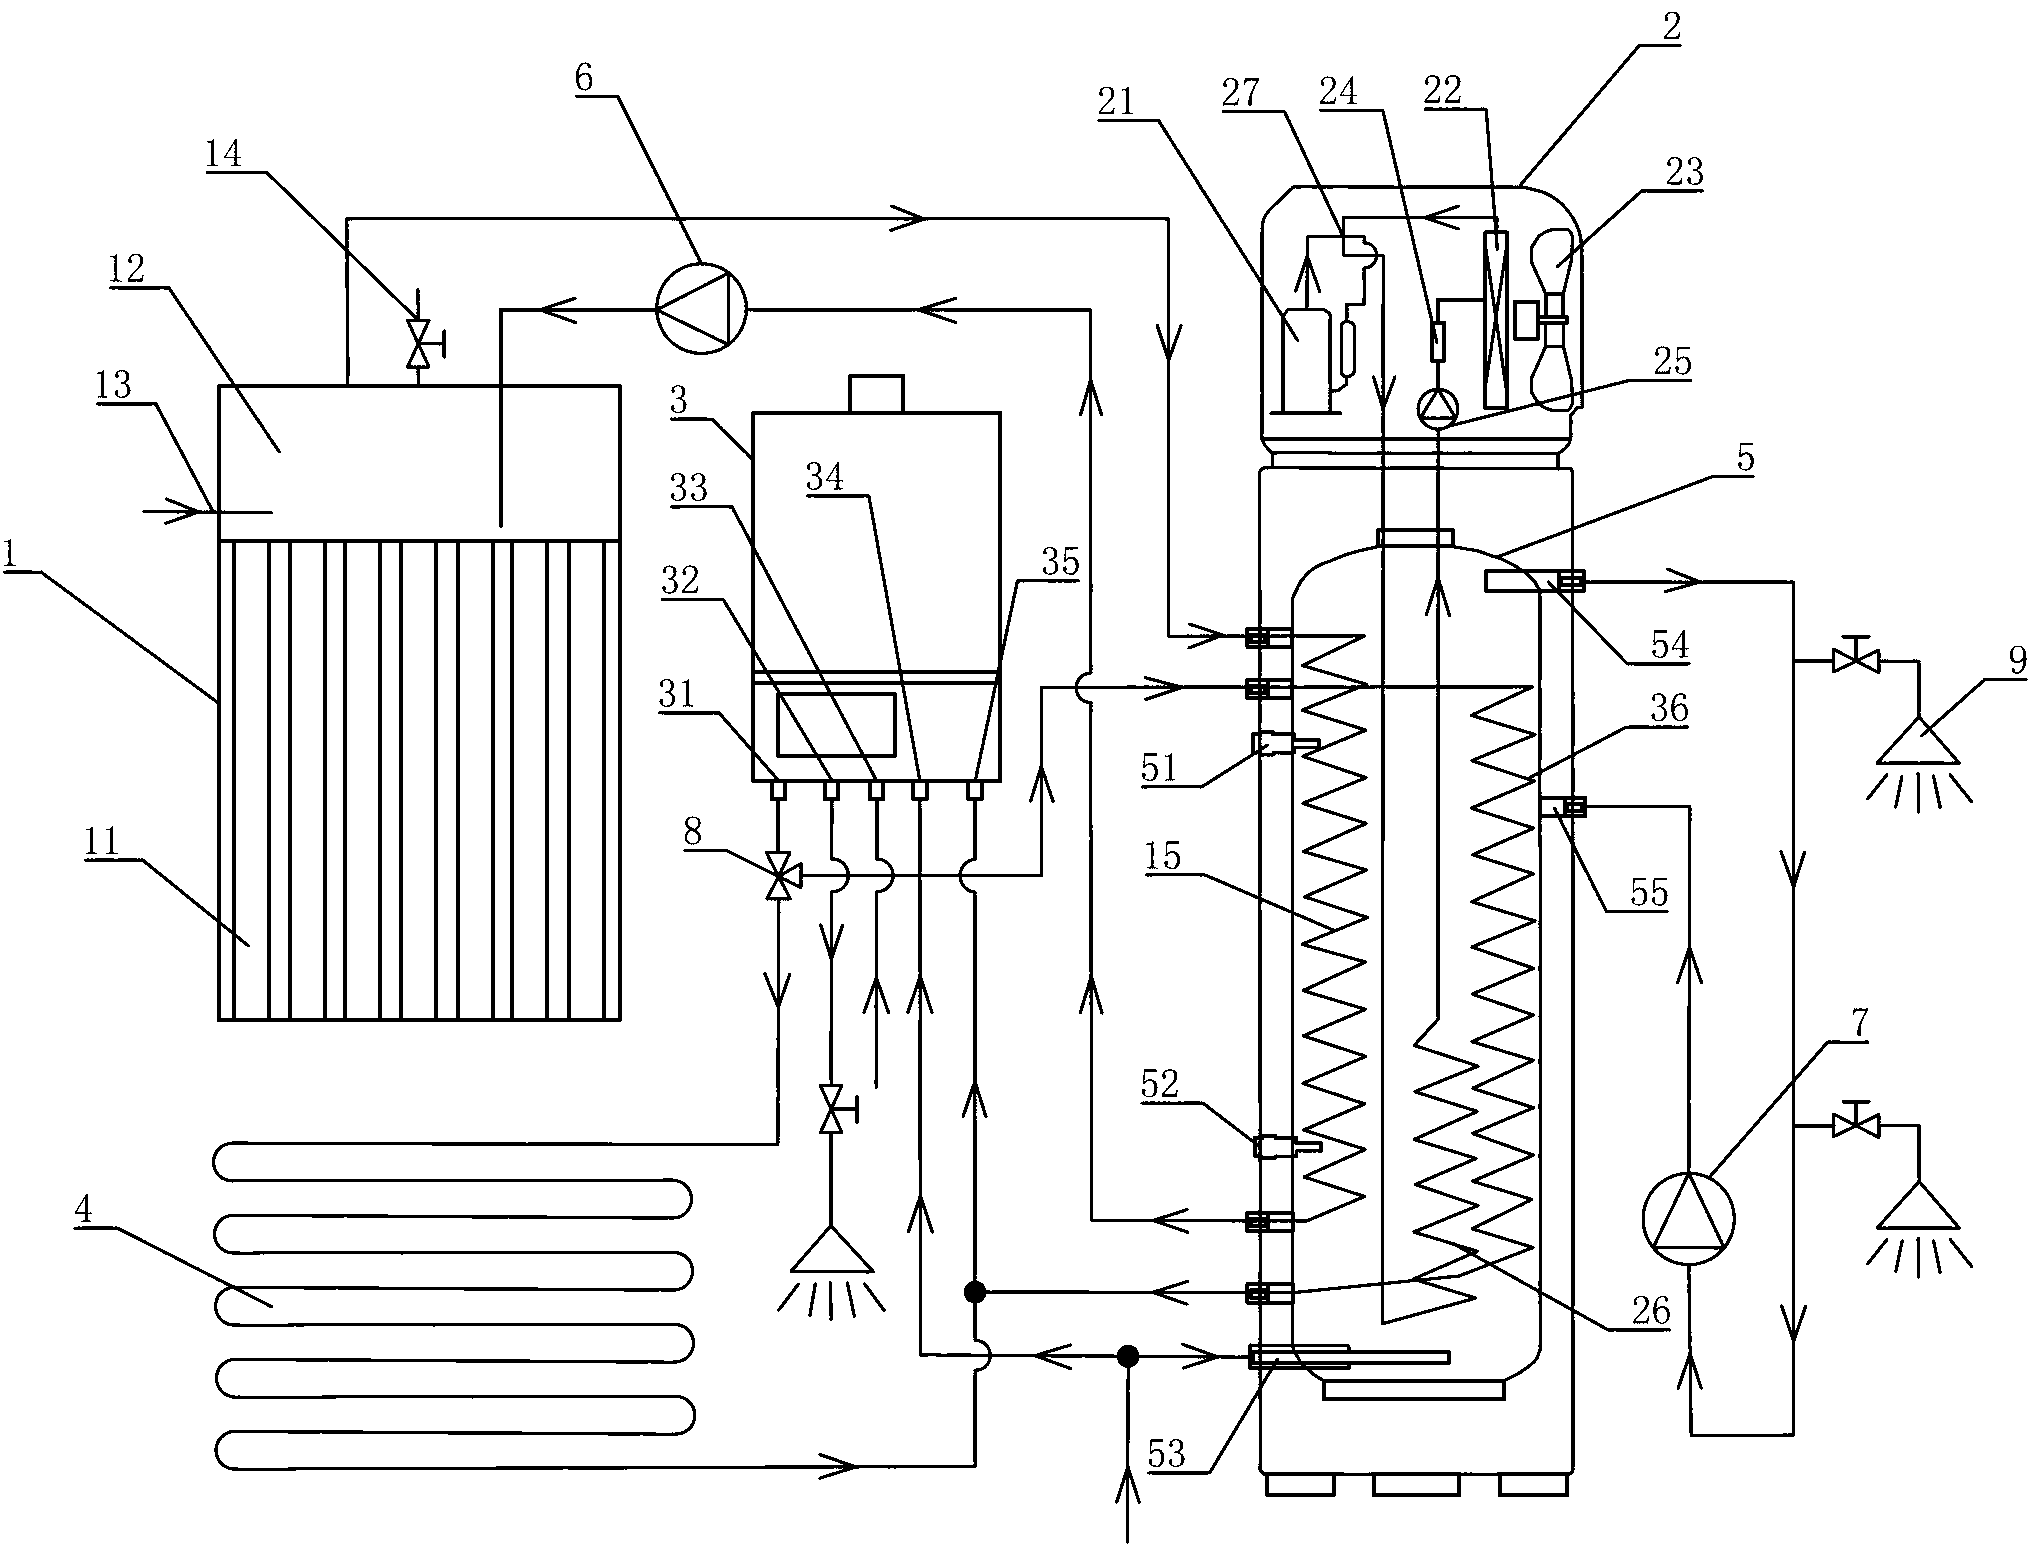 Multi-energy integrated water heating system